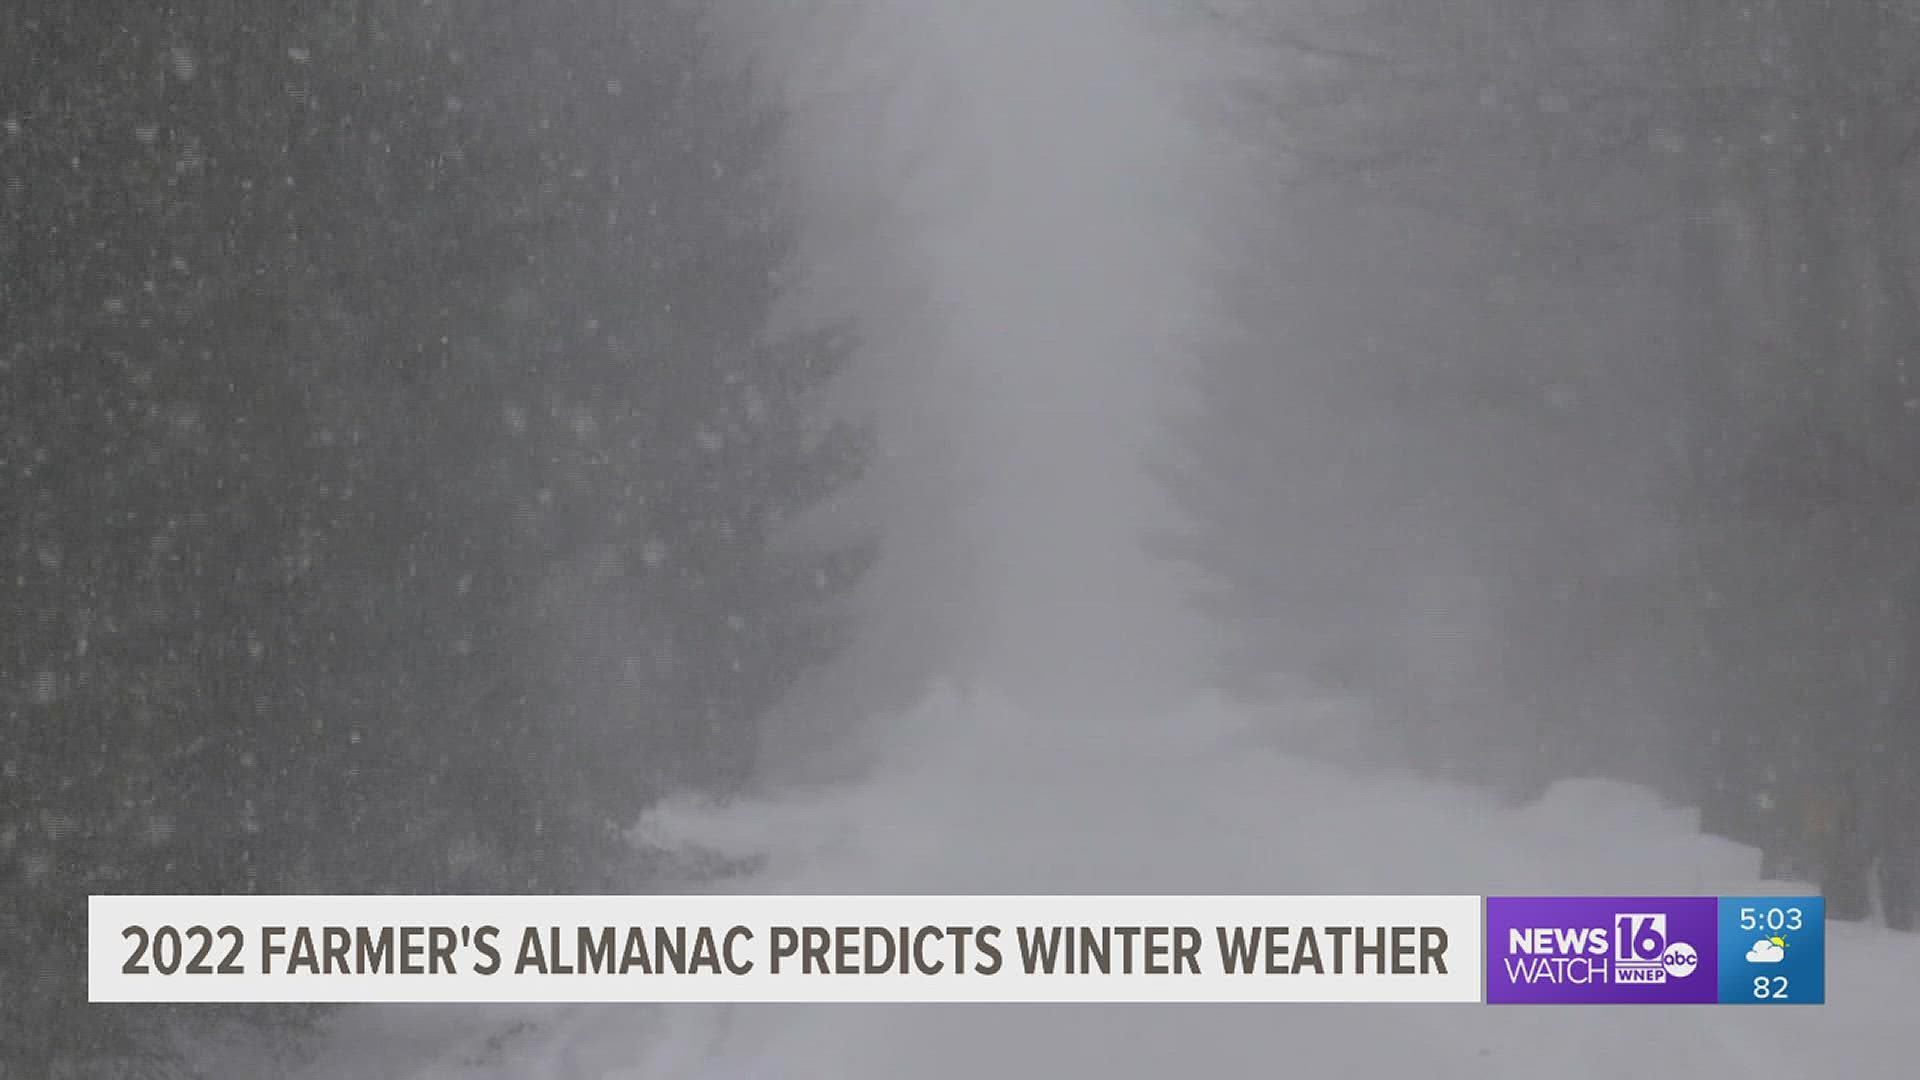 The 2022 Farmer's Almanac predicts a late winter storm to drop a significant amount of the white stuff.